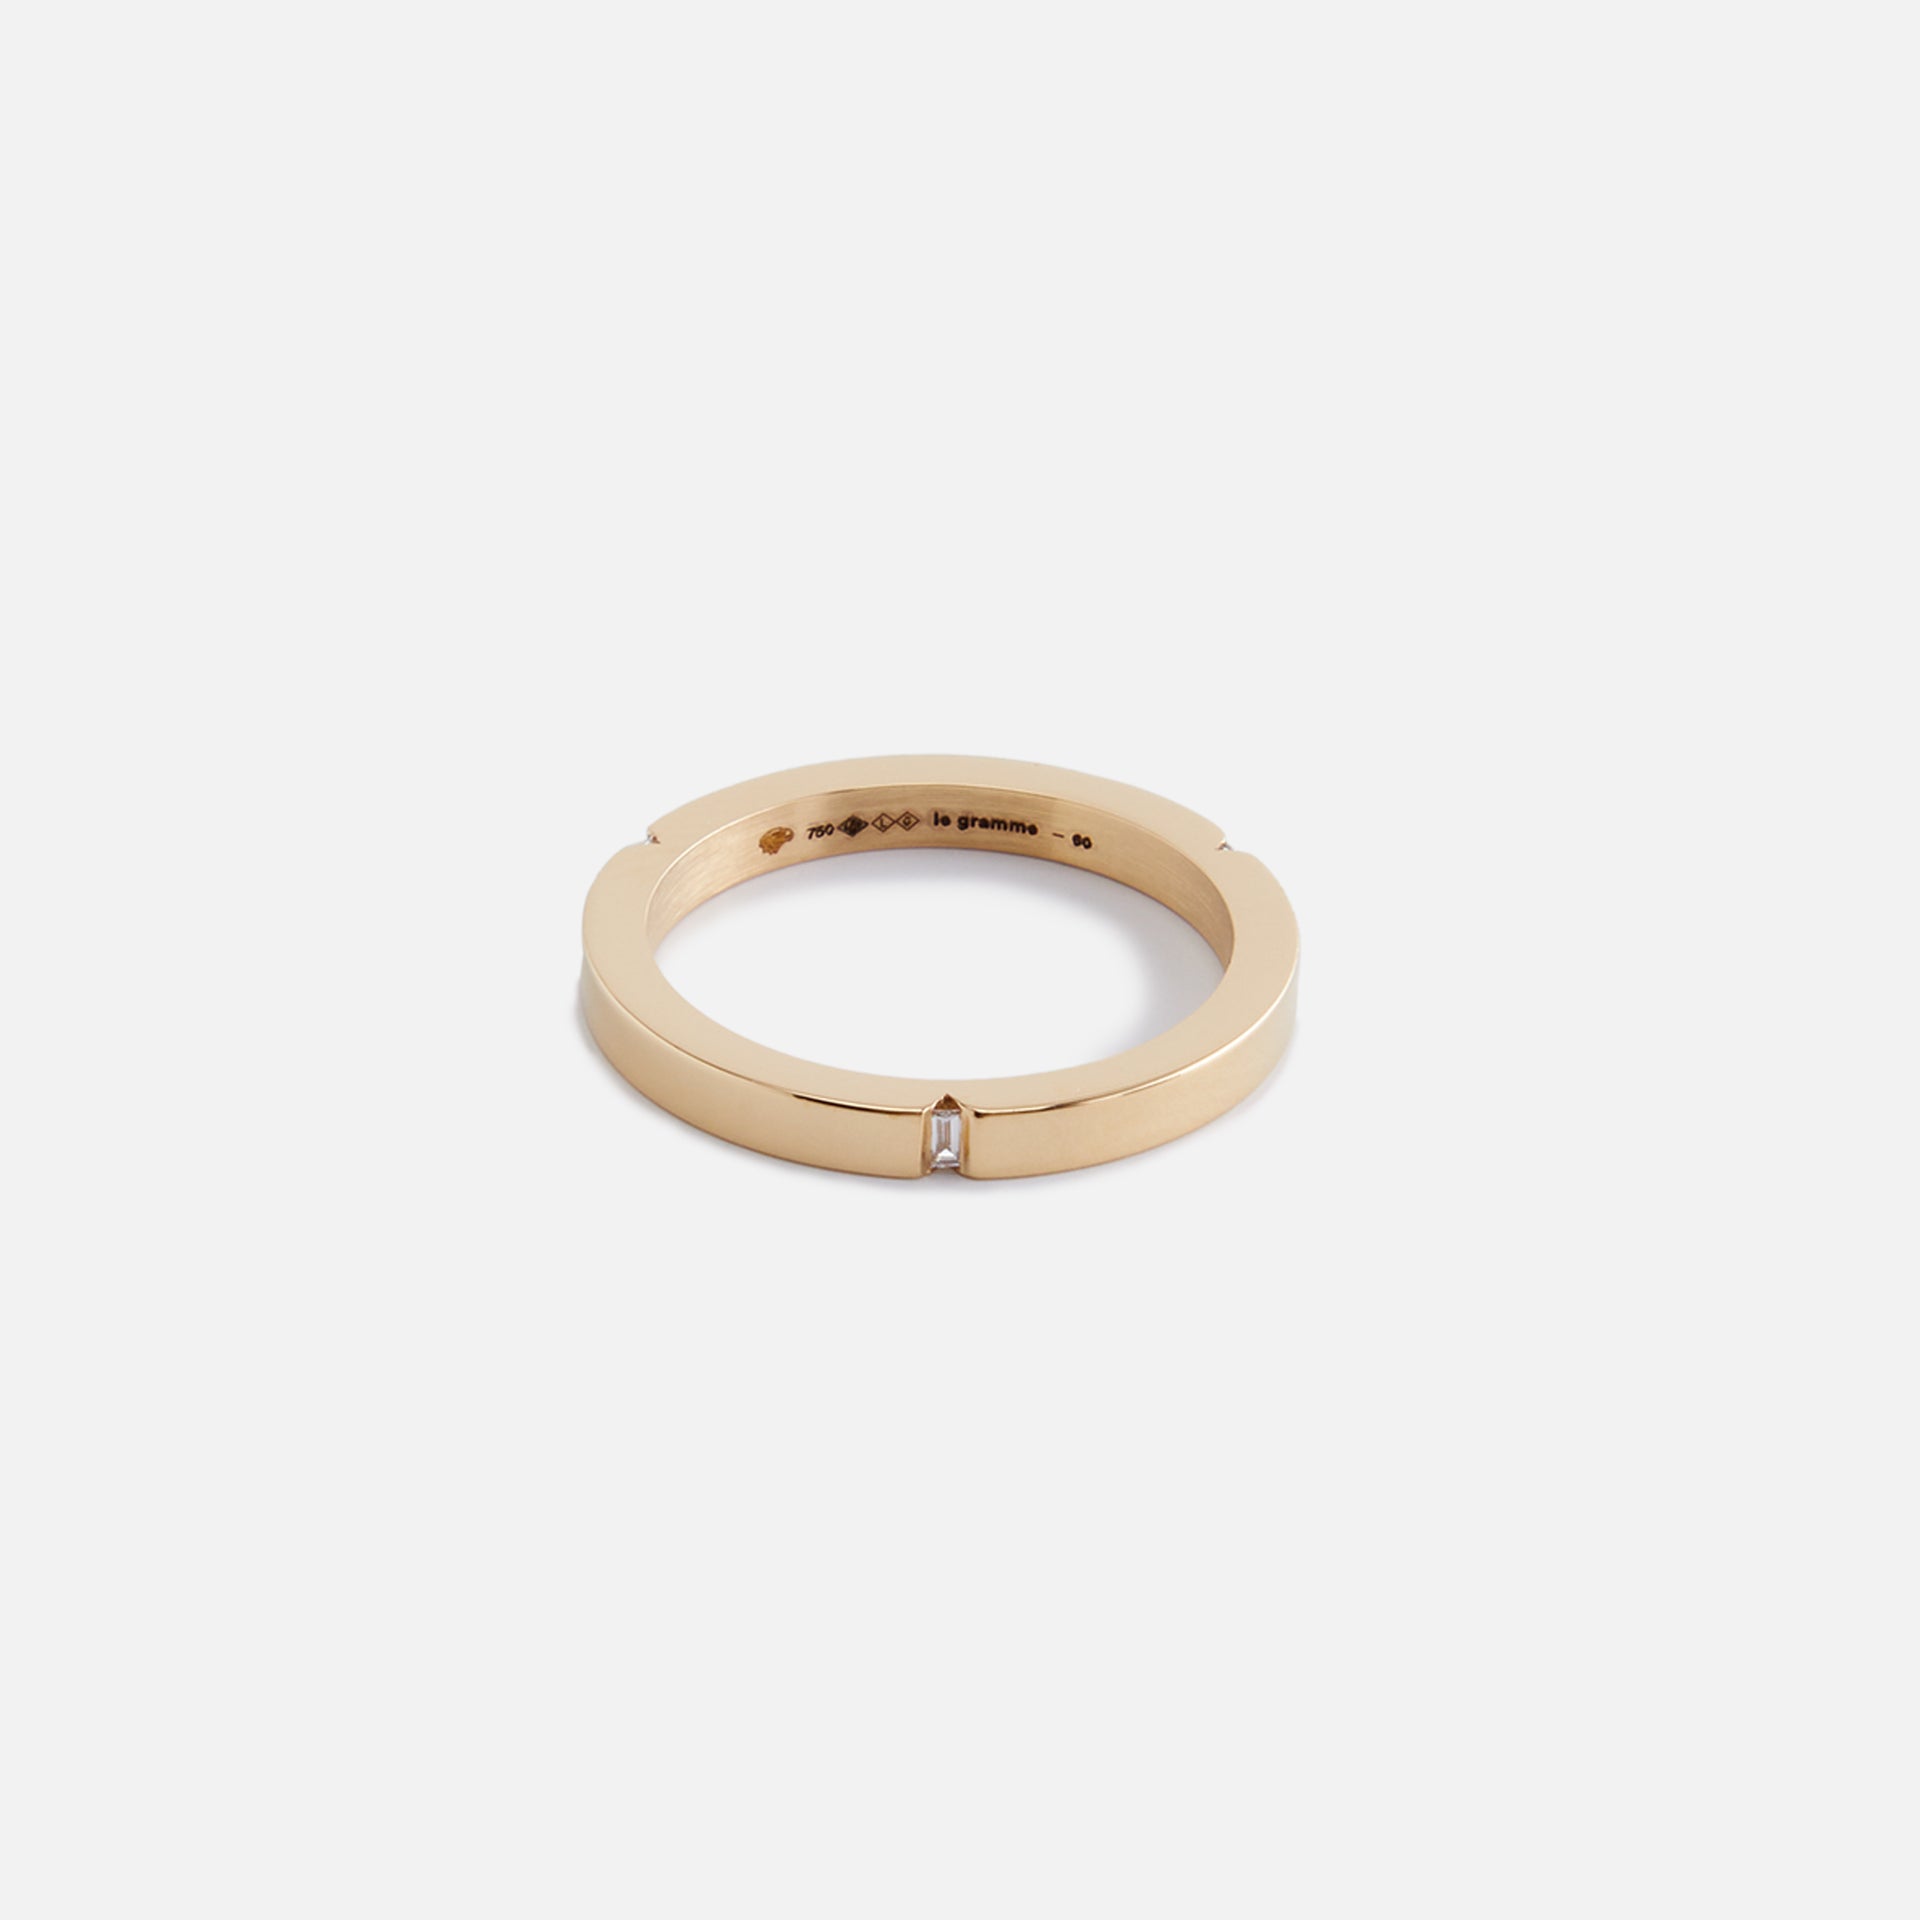 Le Gramme 5g Band Ring with Three Diamonds Outside - Gold